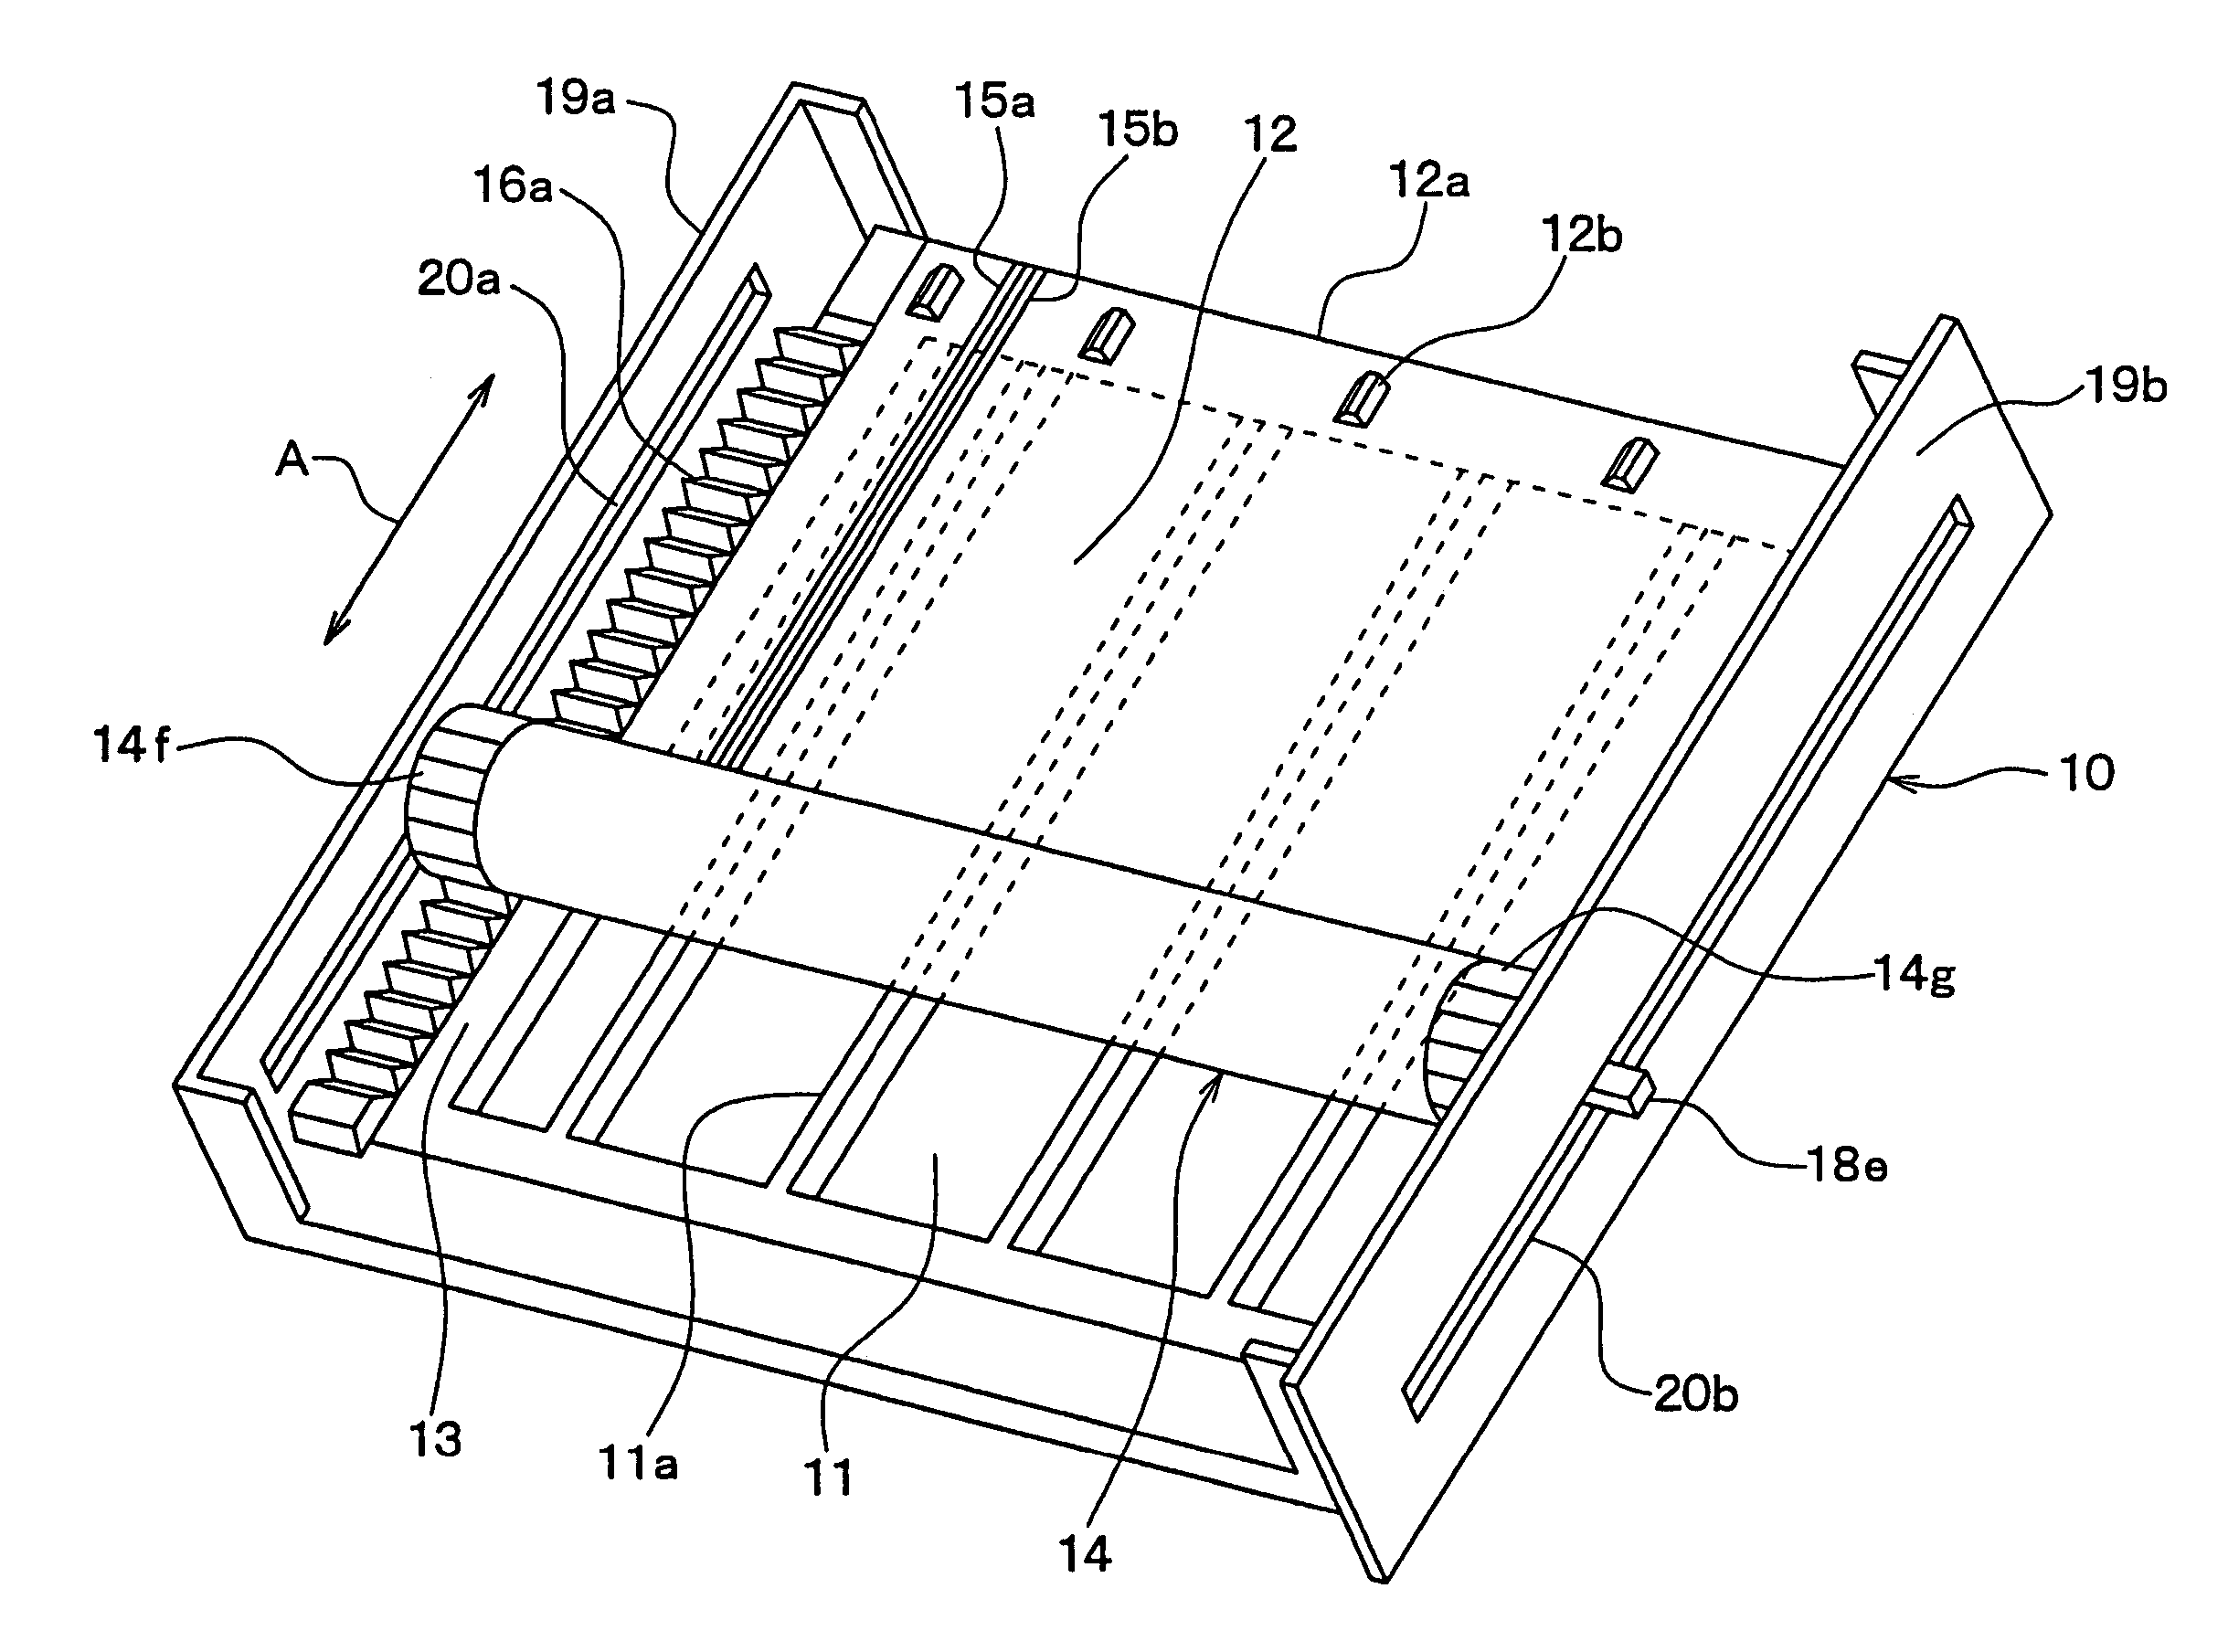 Air passage switching device